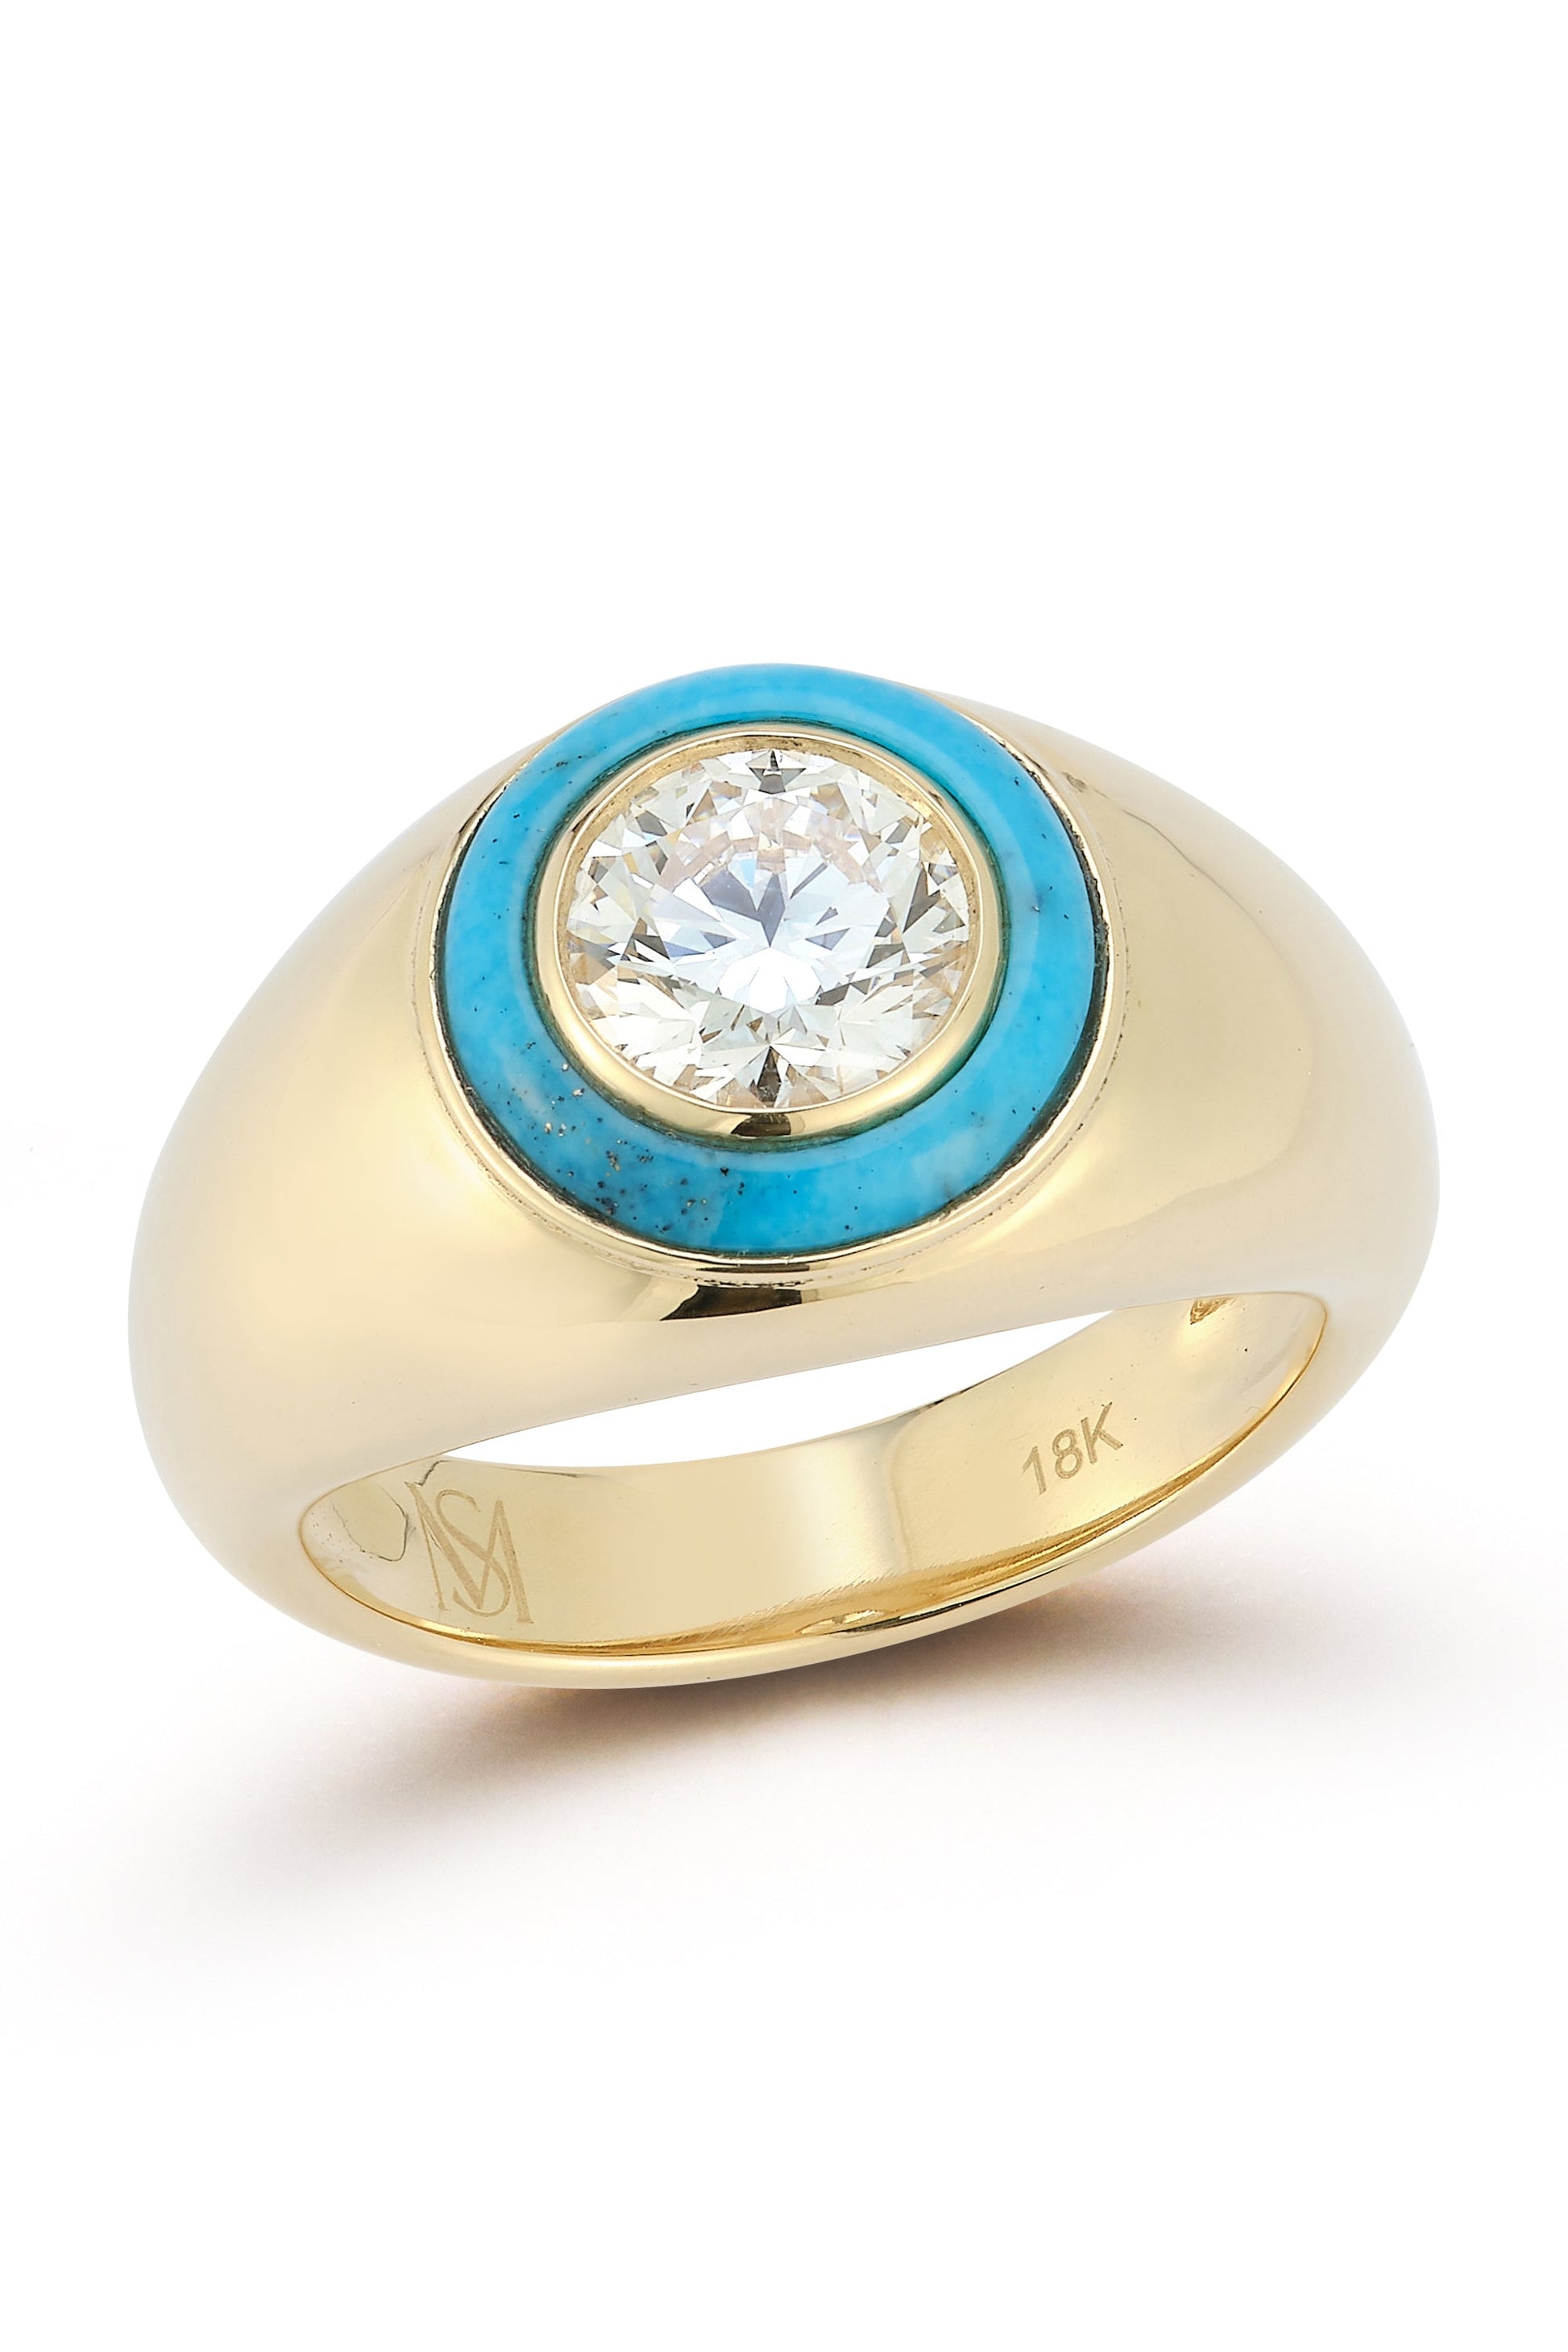 MAGGI SIMPKINS-Round Bubble Ring - Turquoise-YELLOW GOLD